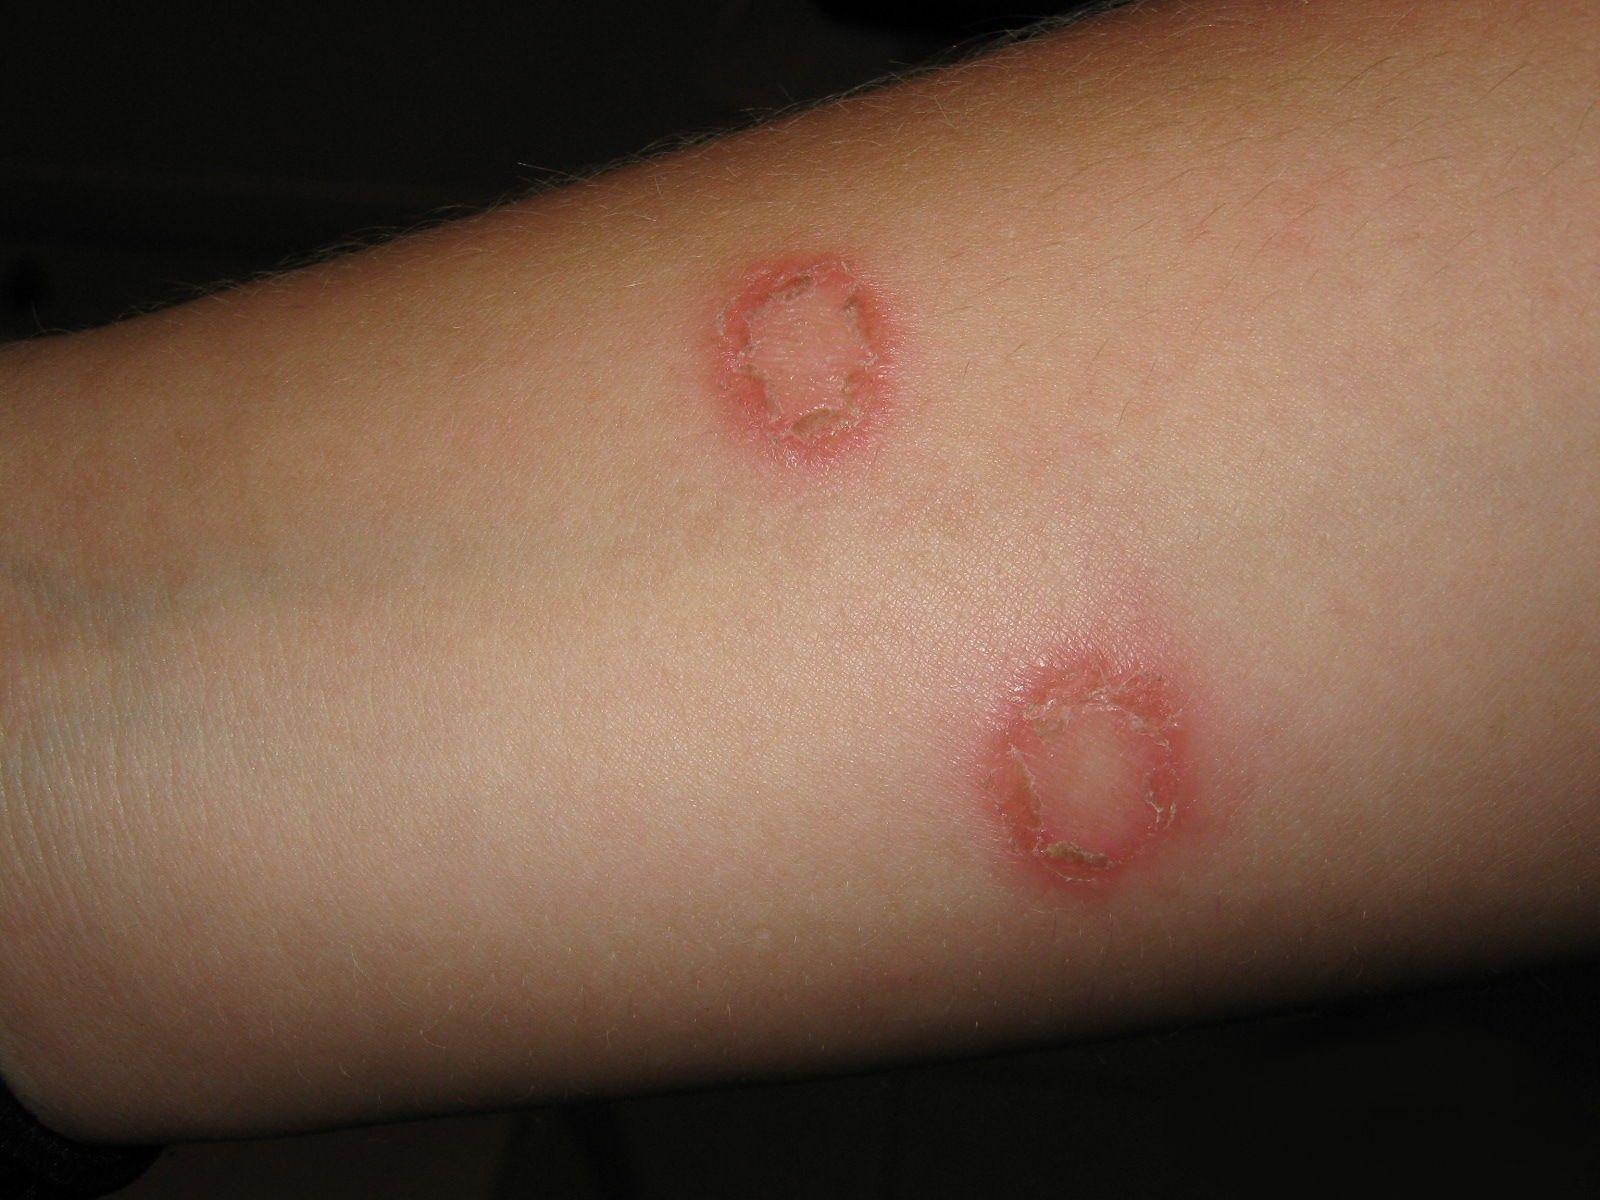 Red Circle with White Spot Logo - Ringworm